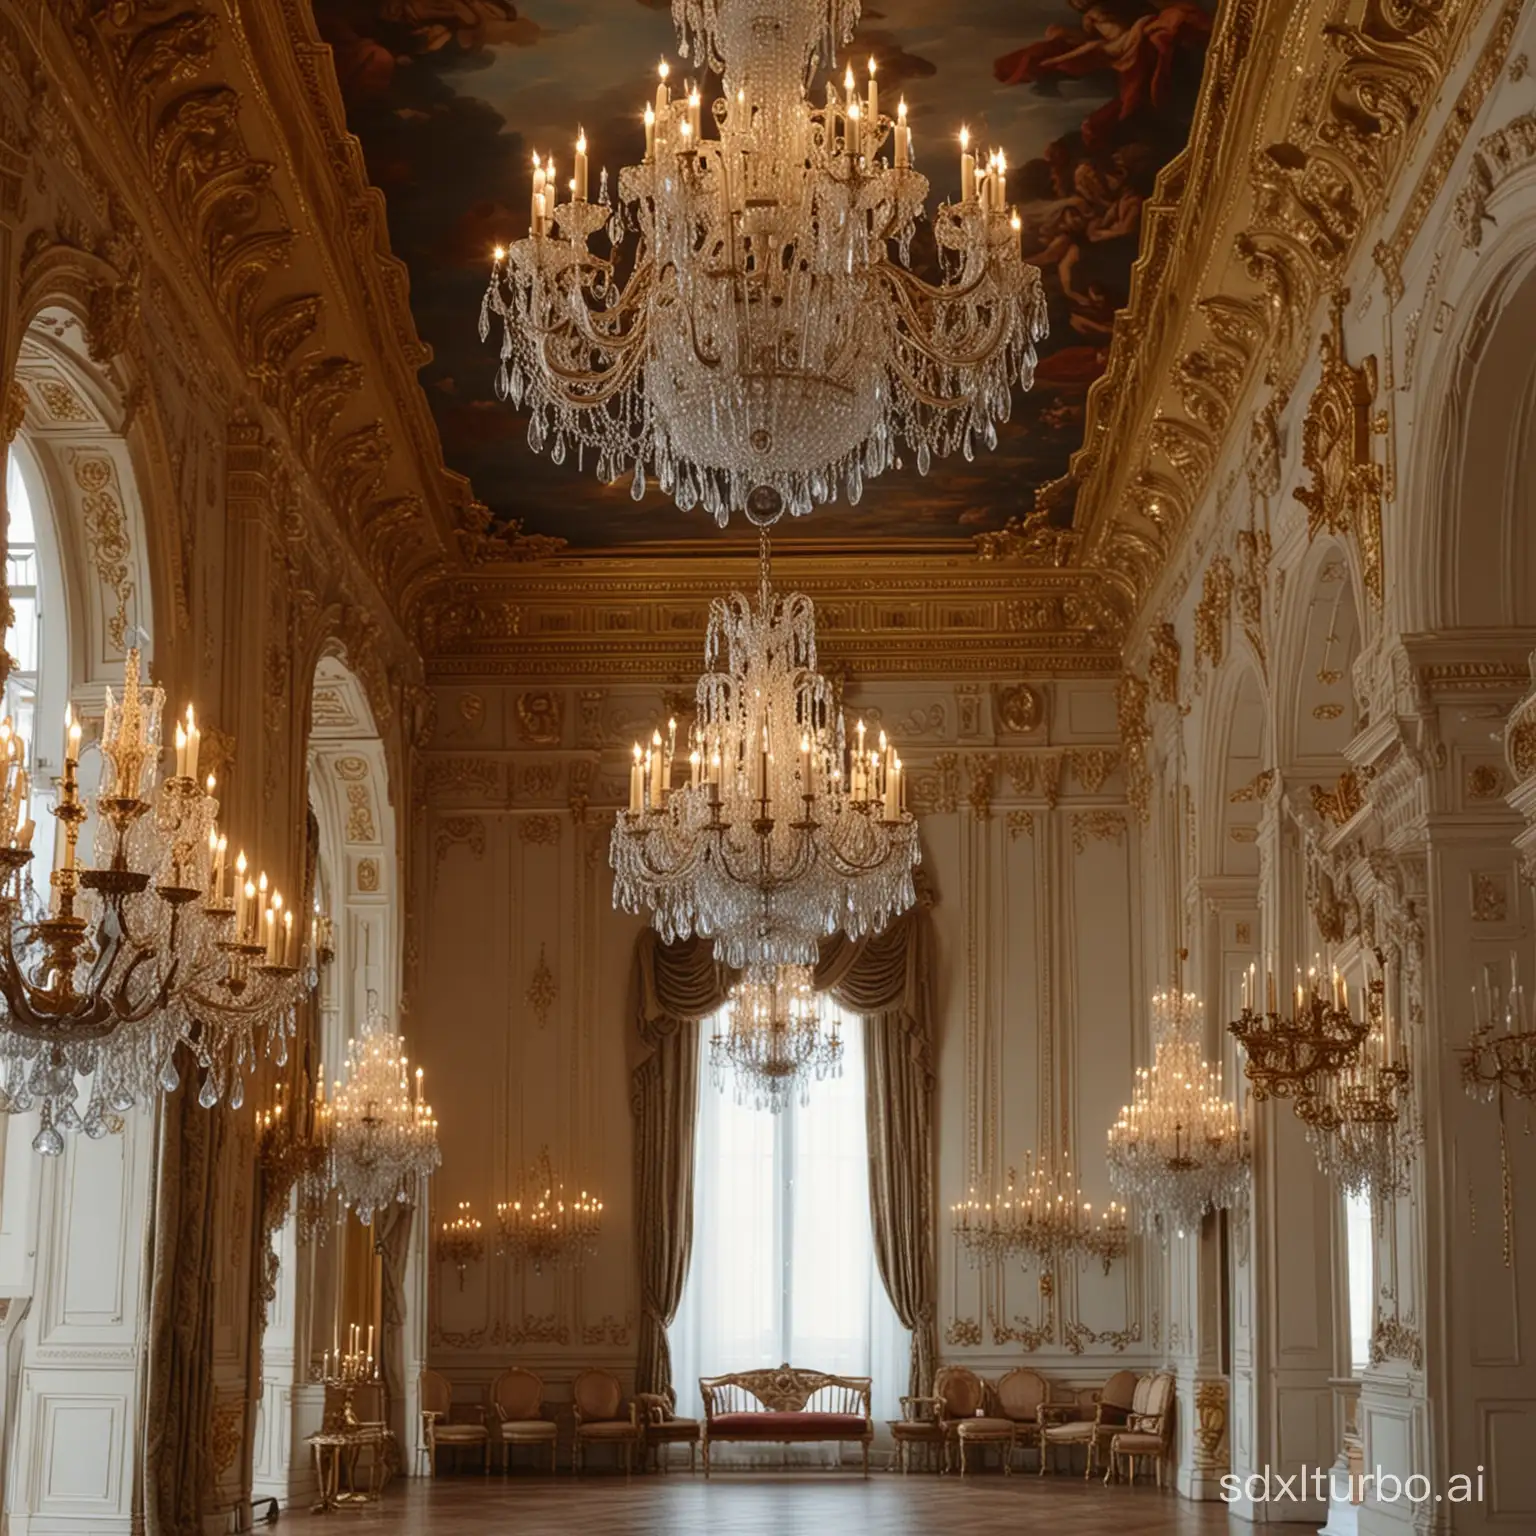 wall view closeup.face-to-face. set in an opulent royal castle interior adorned with chandeliers